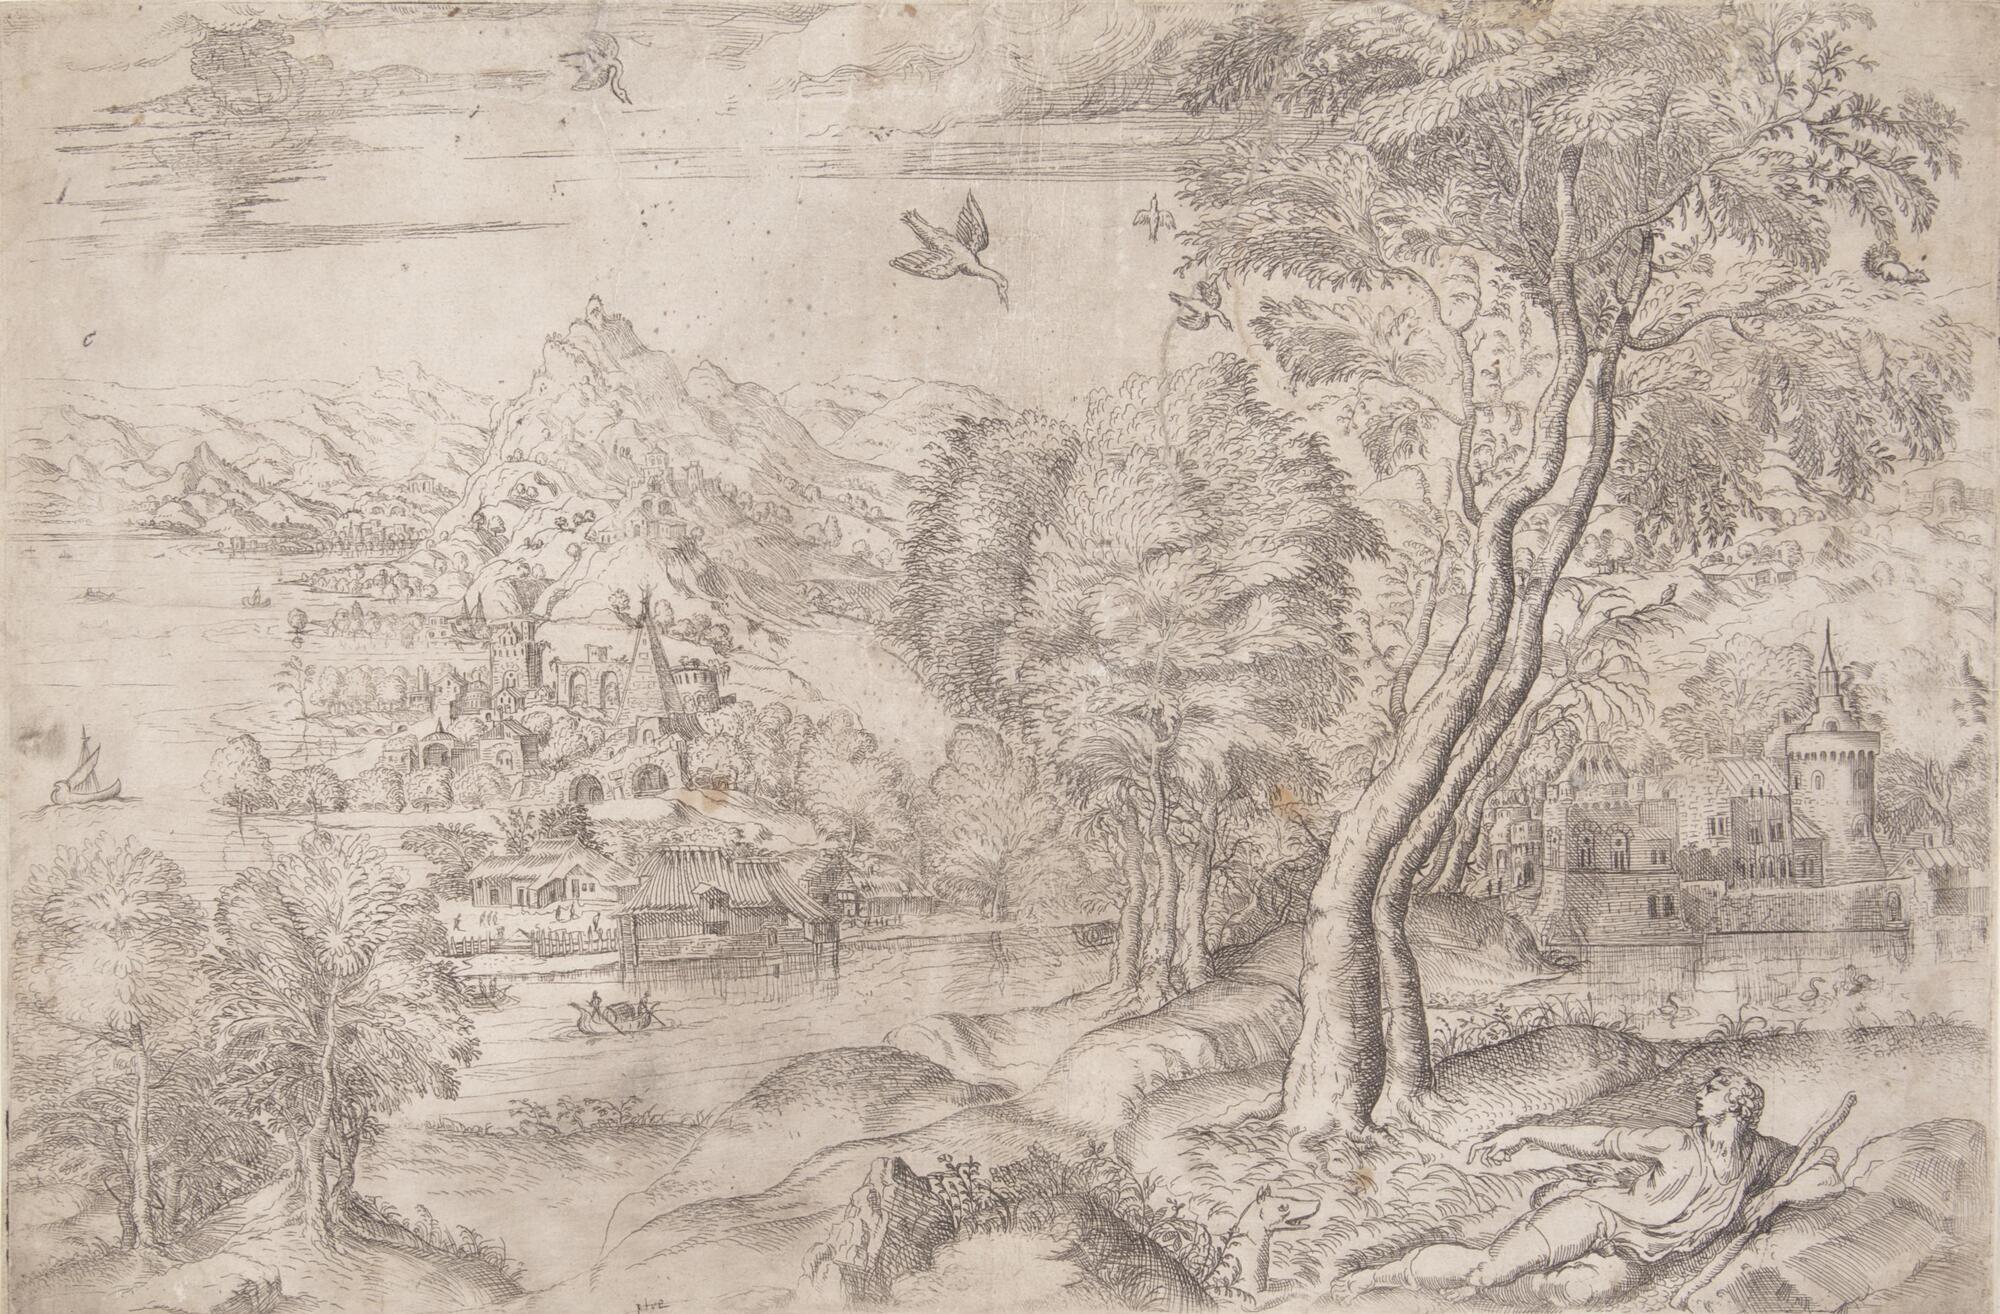 In the right foreground of a landscape scene there is a male figure reclining before two tall trees. The figure holds a wooden staff in one arm and points toward his dog with the other. In the distance there is a lake and mountainous landscape replete with many buildings. Several long-necked birds fly in the sky.<br />